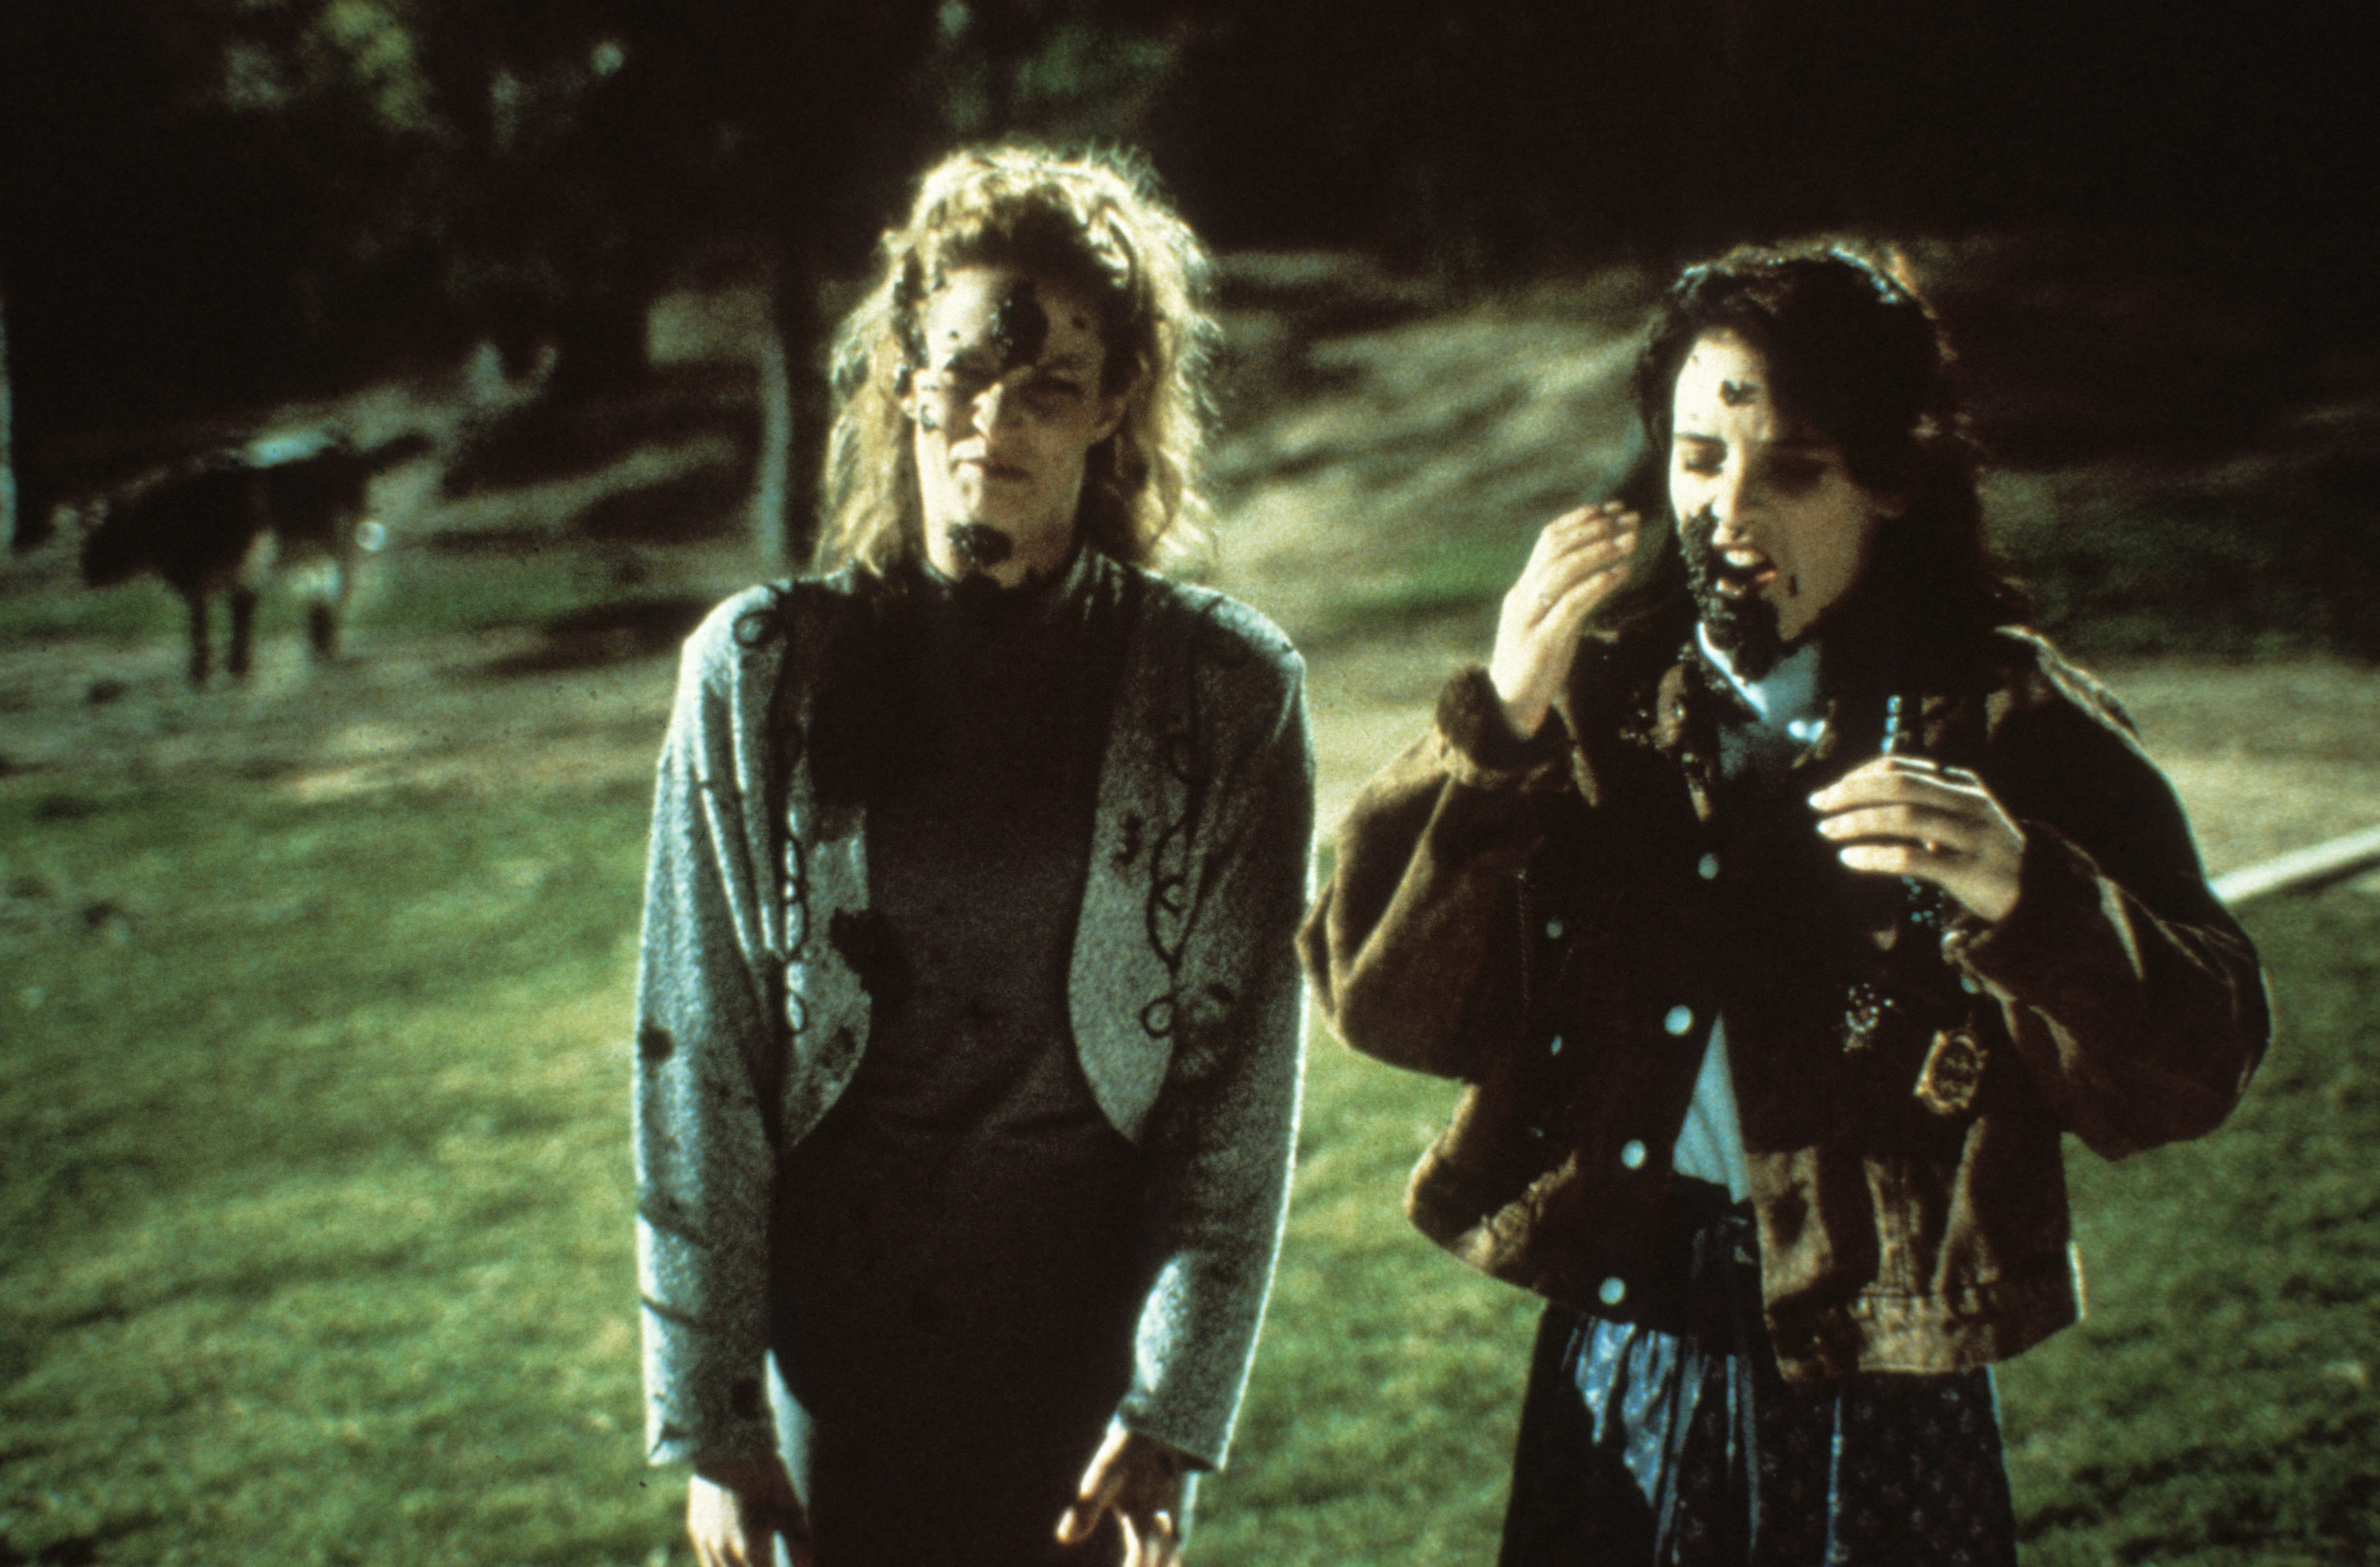 Falk and Winona Ryder in a scene in a field, covered in muck